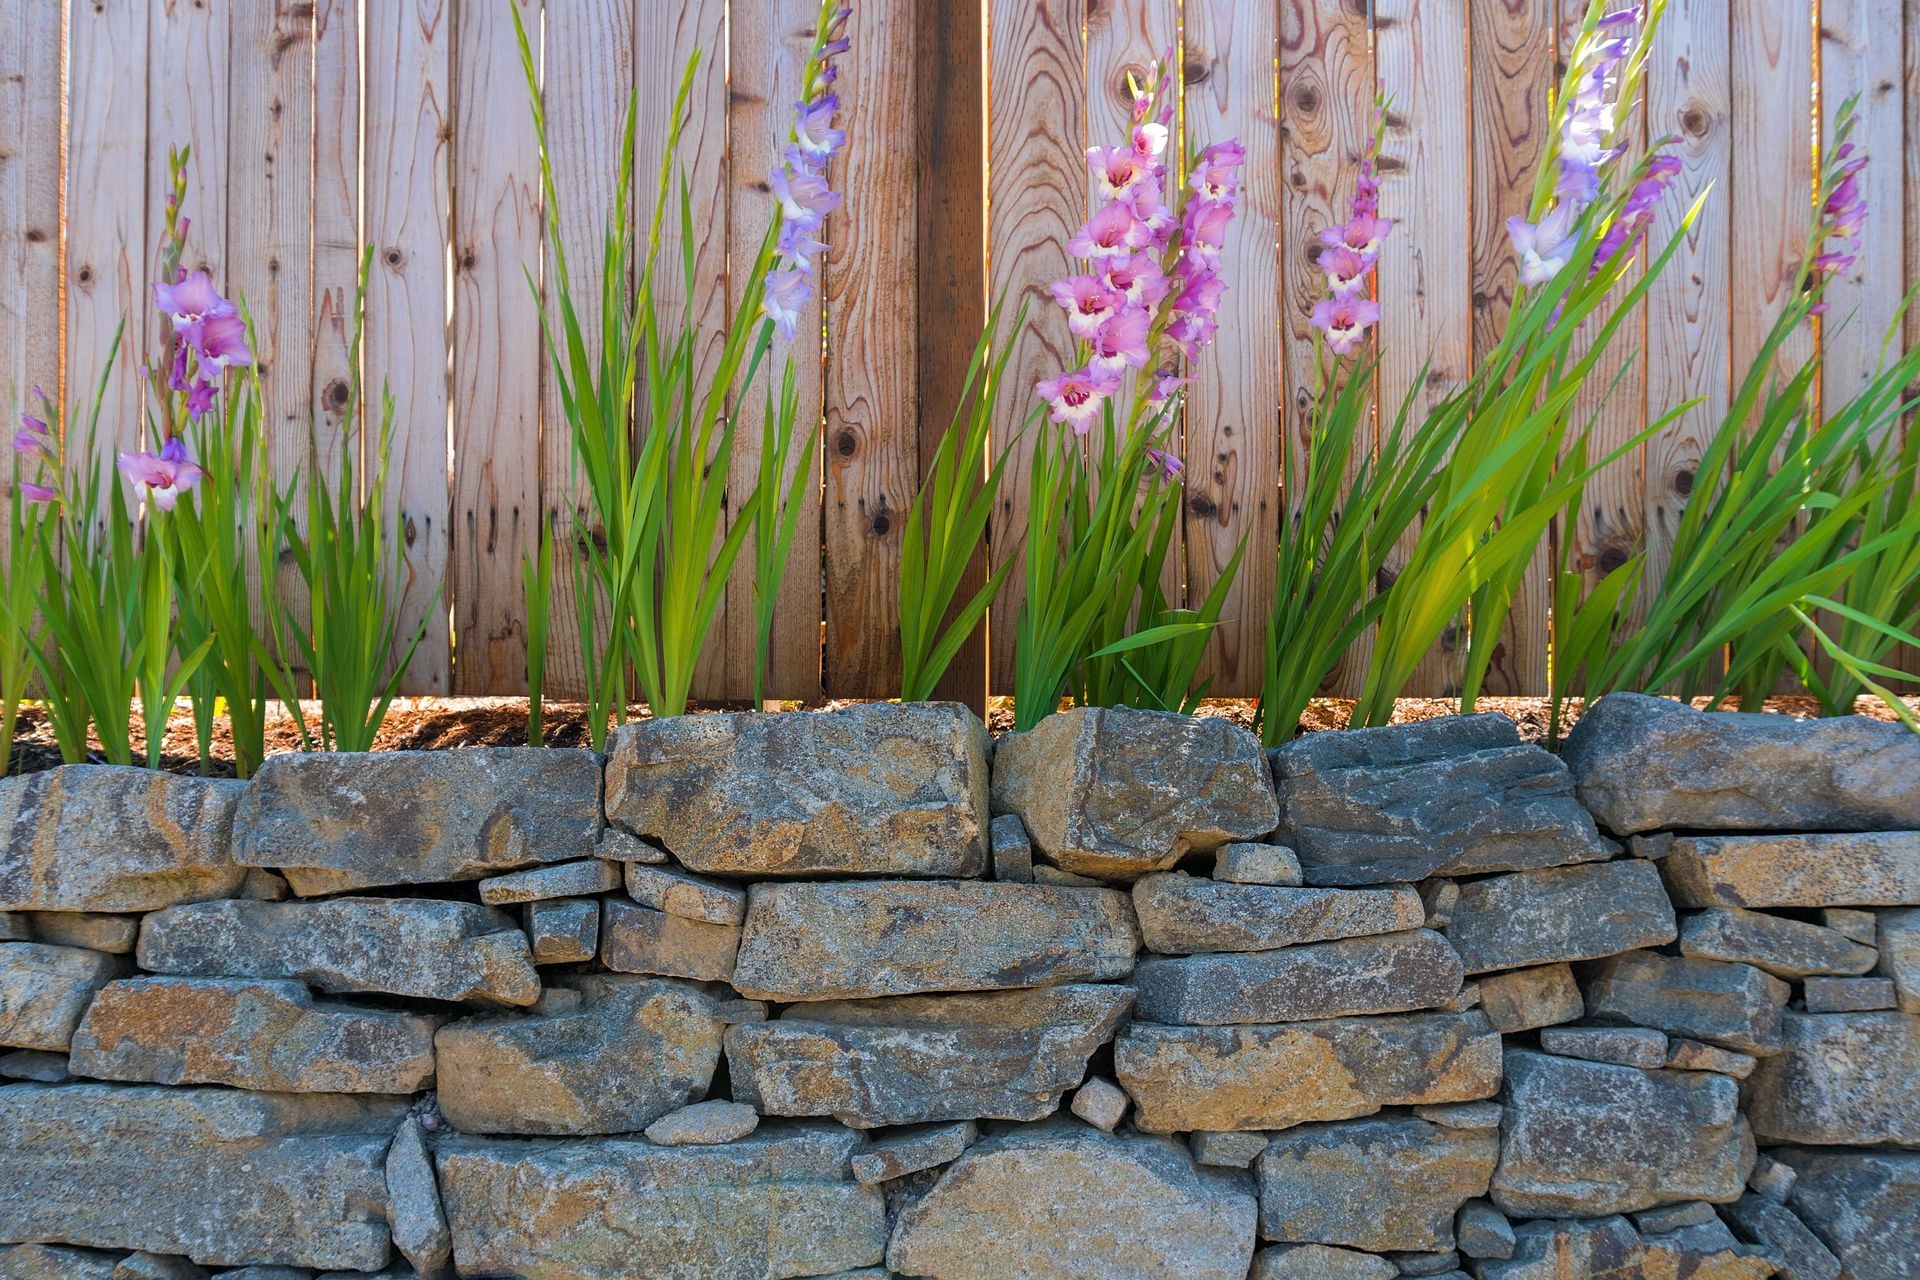 Gladiolus flowers blooming along garden wood fence in summer